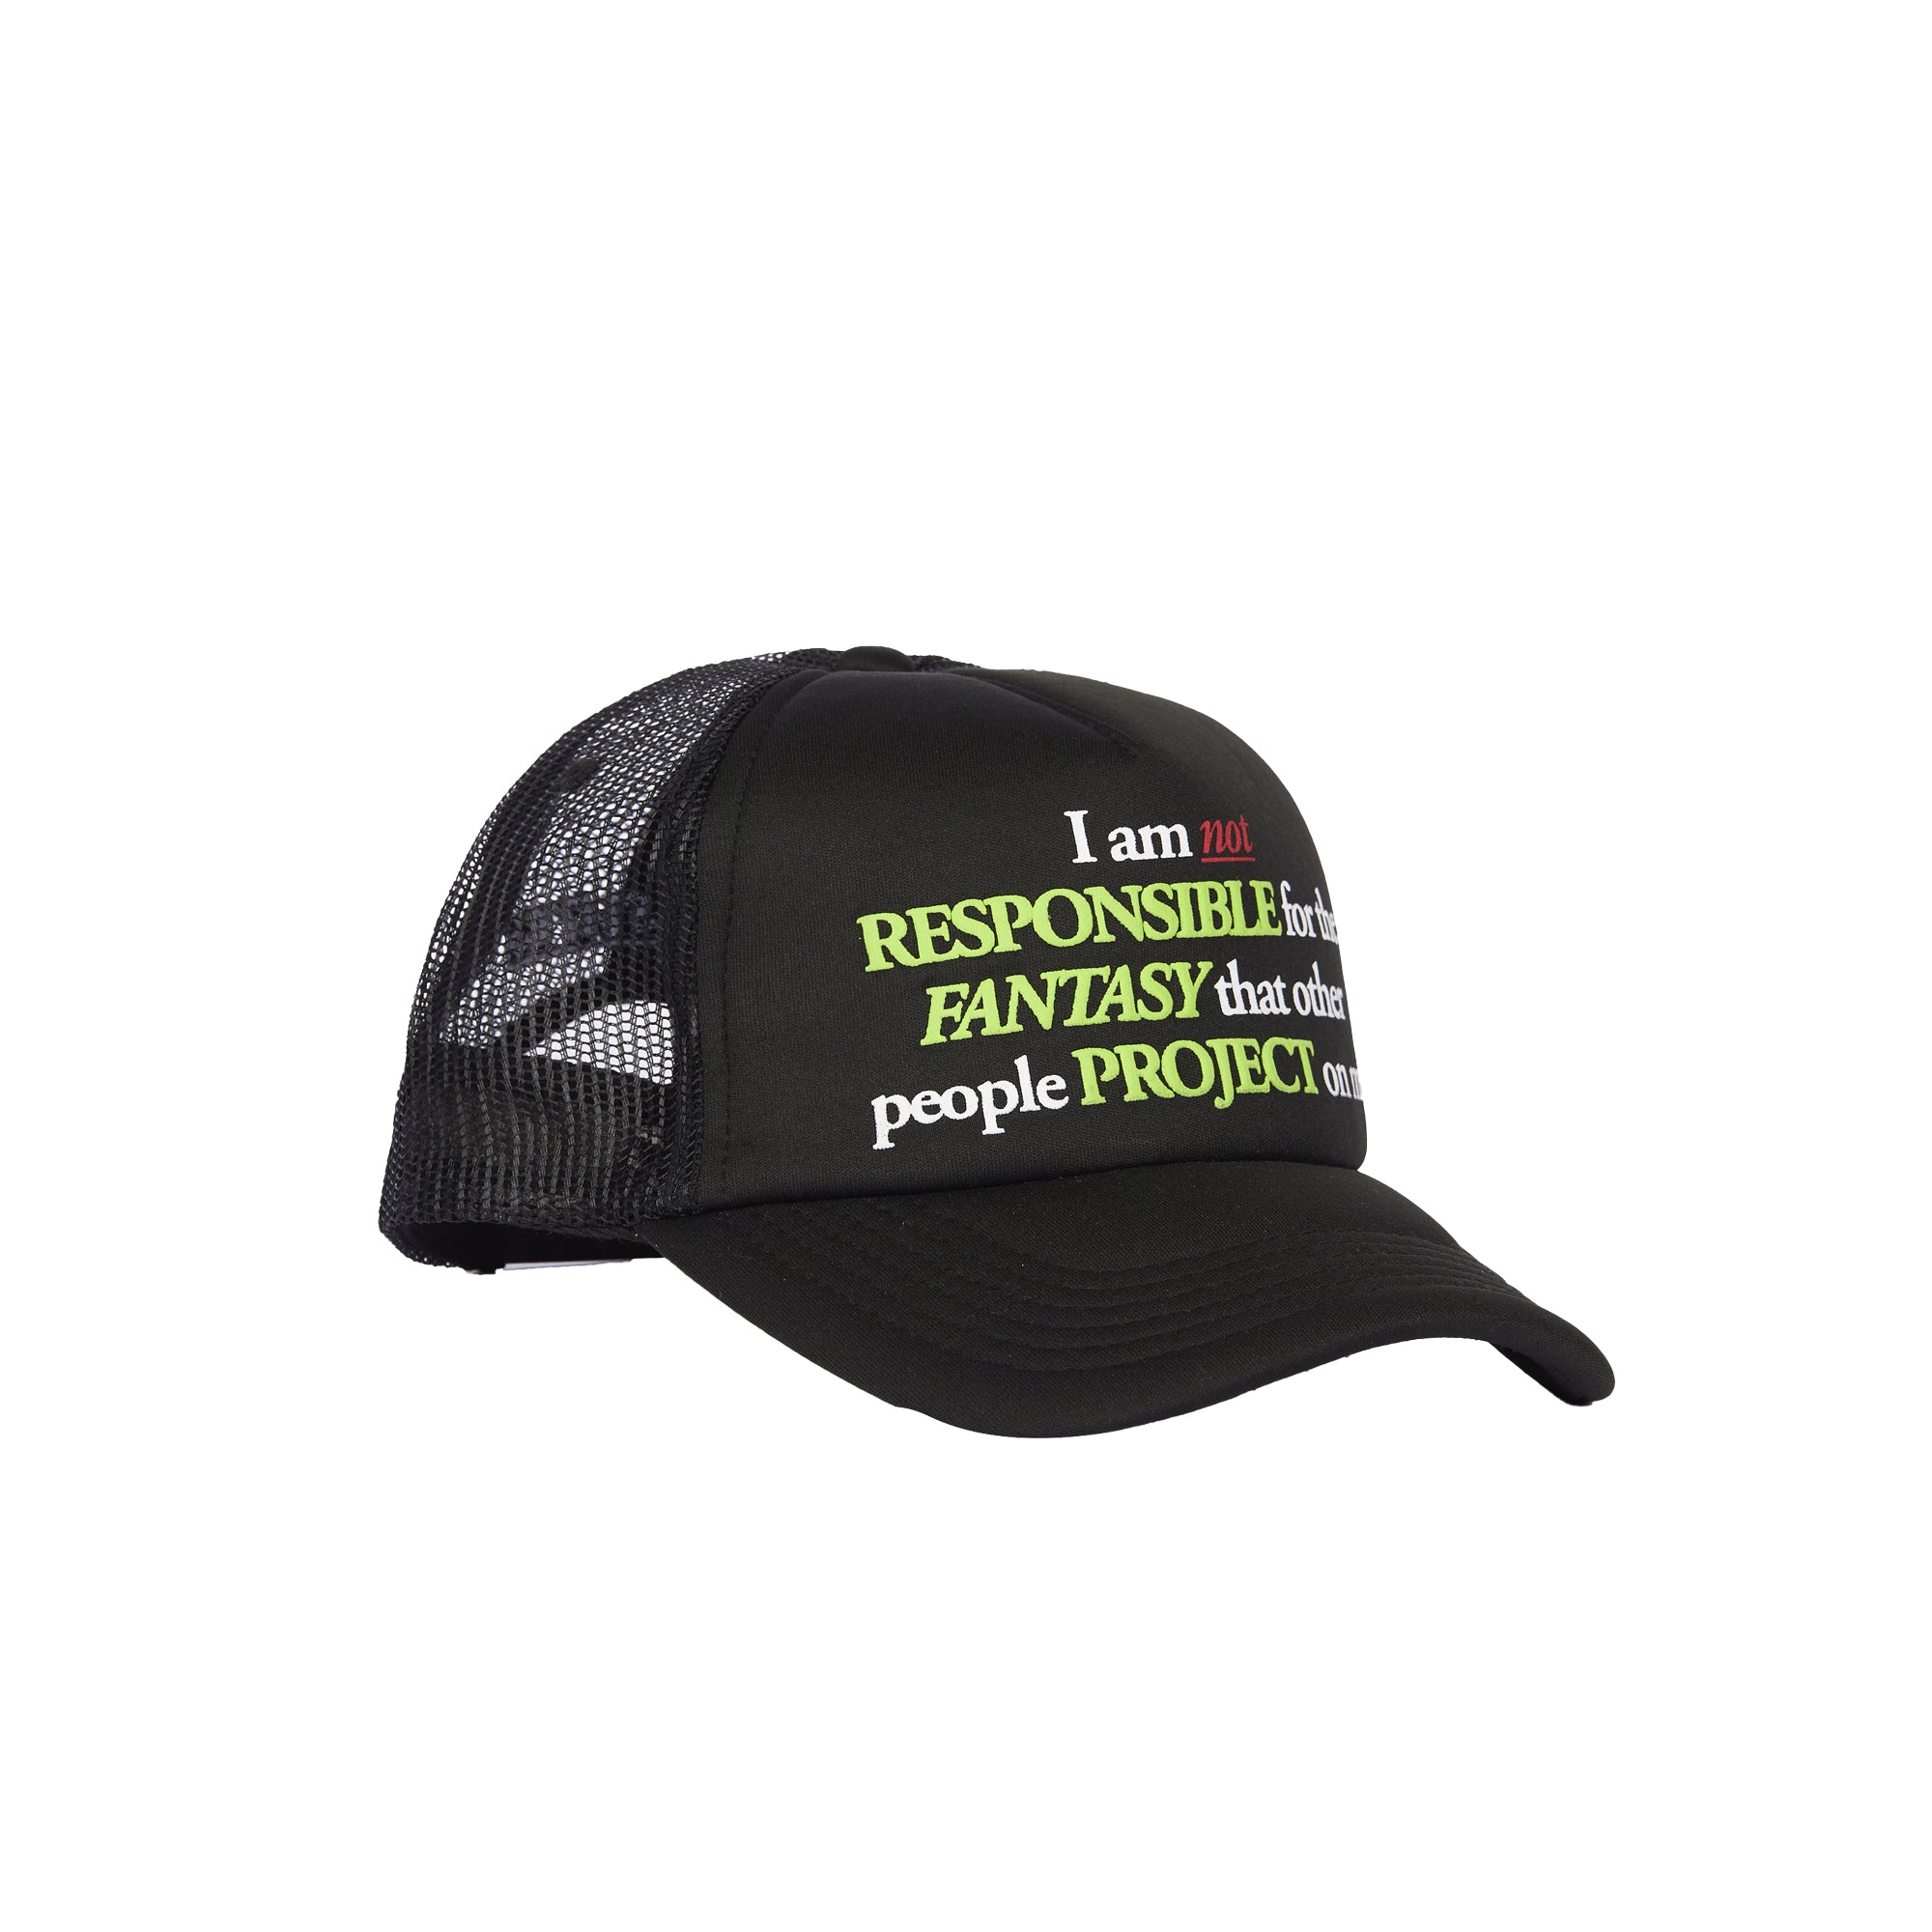 Louise Empty Top Baseball Caps Breathable Trucker Hat Leaky Top